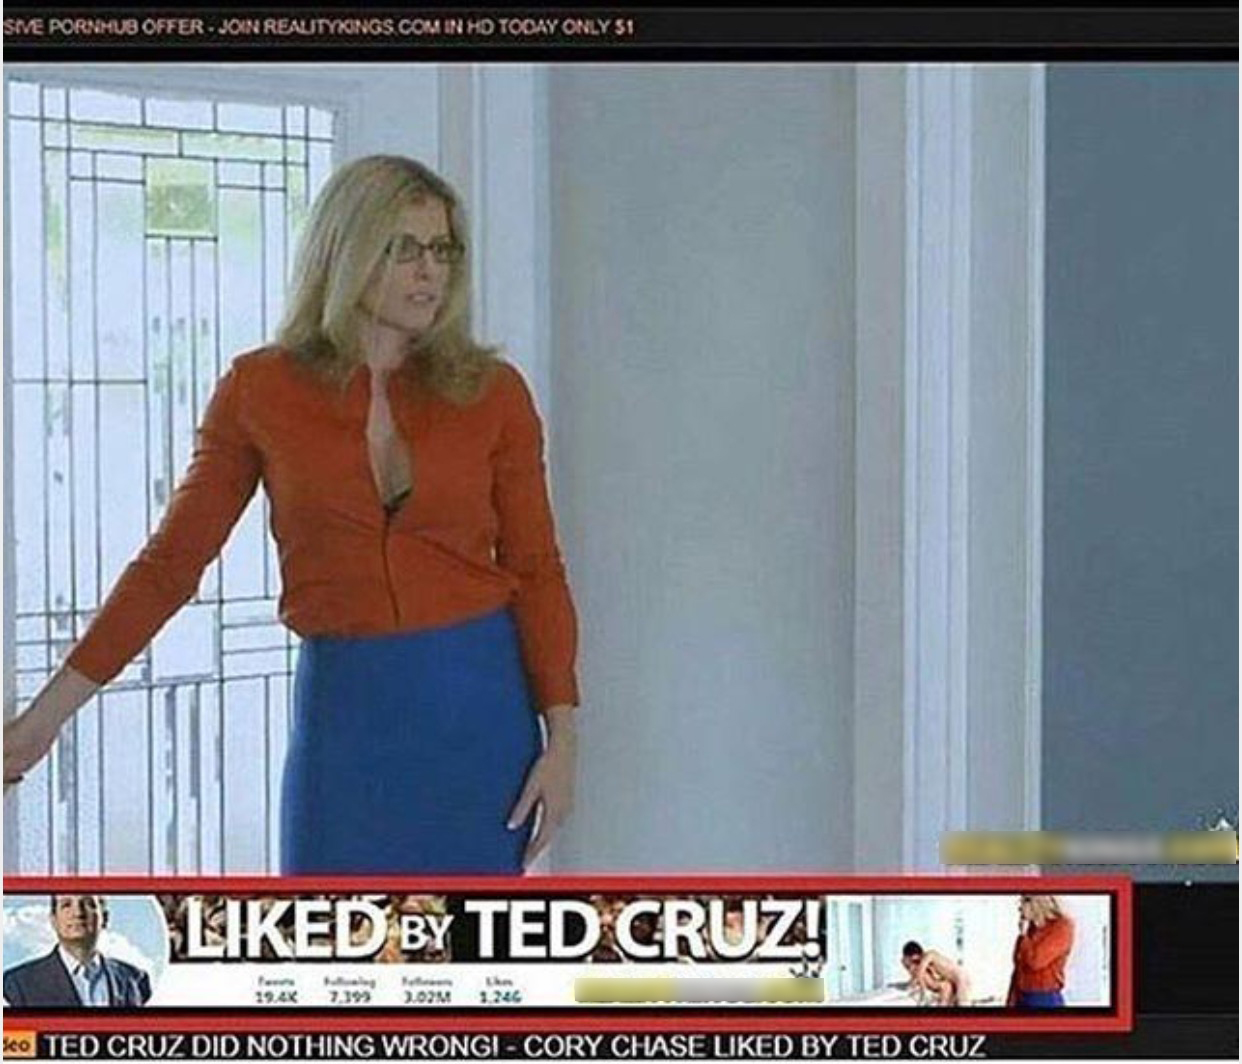 ted cruz meme cory chase - Sive Pornhub OfferJoin Realityings Com In Ho Today Only Si d By Ted Cruz! ko Ted Cruz Did Nothing Wrongi Cory Chase d By Ted Cruz